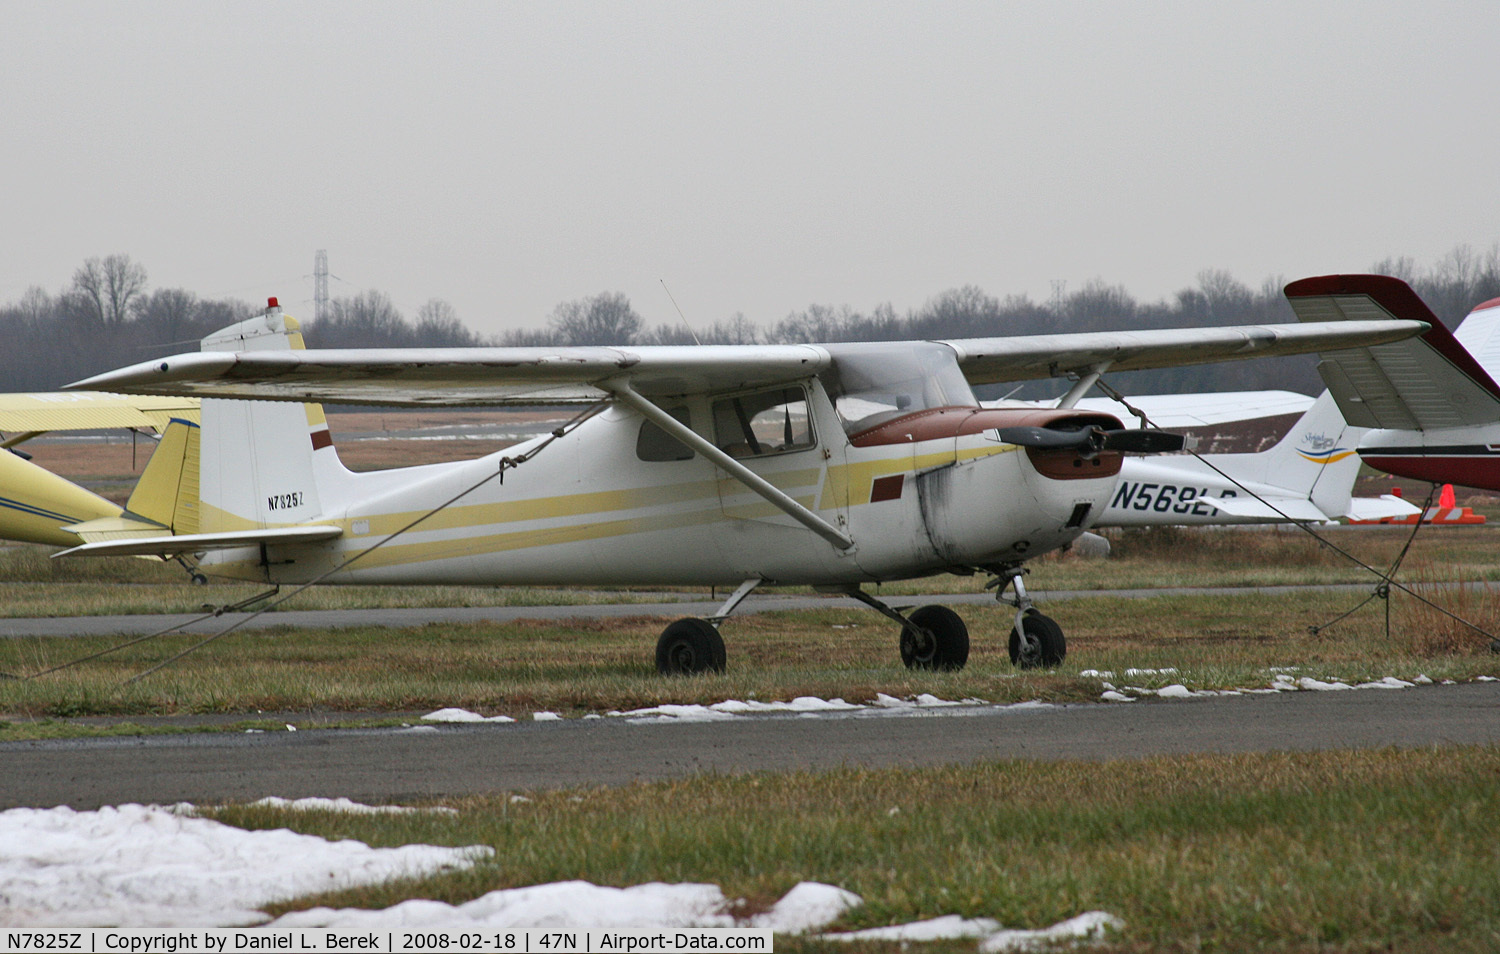 N7825Z, 1963 Cessna 150C C/N 15059925, The equipment may be old, but at least it's paid for.